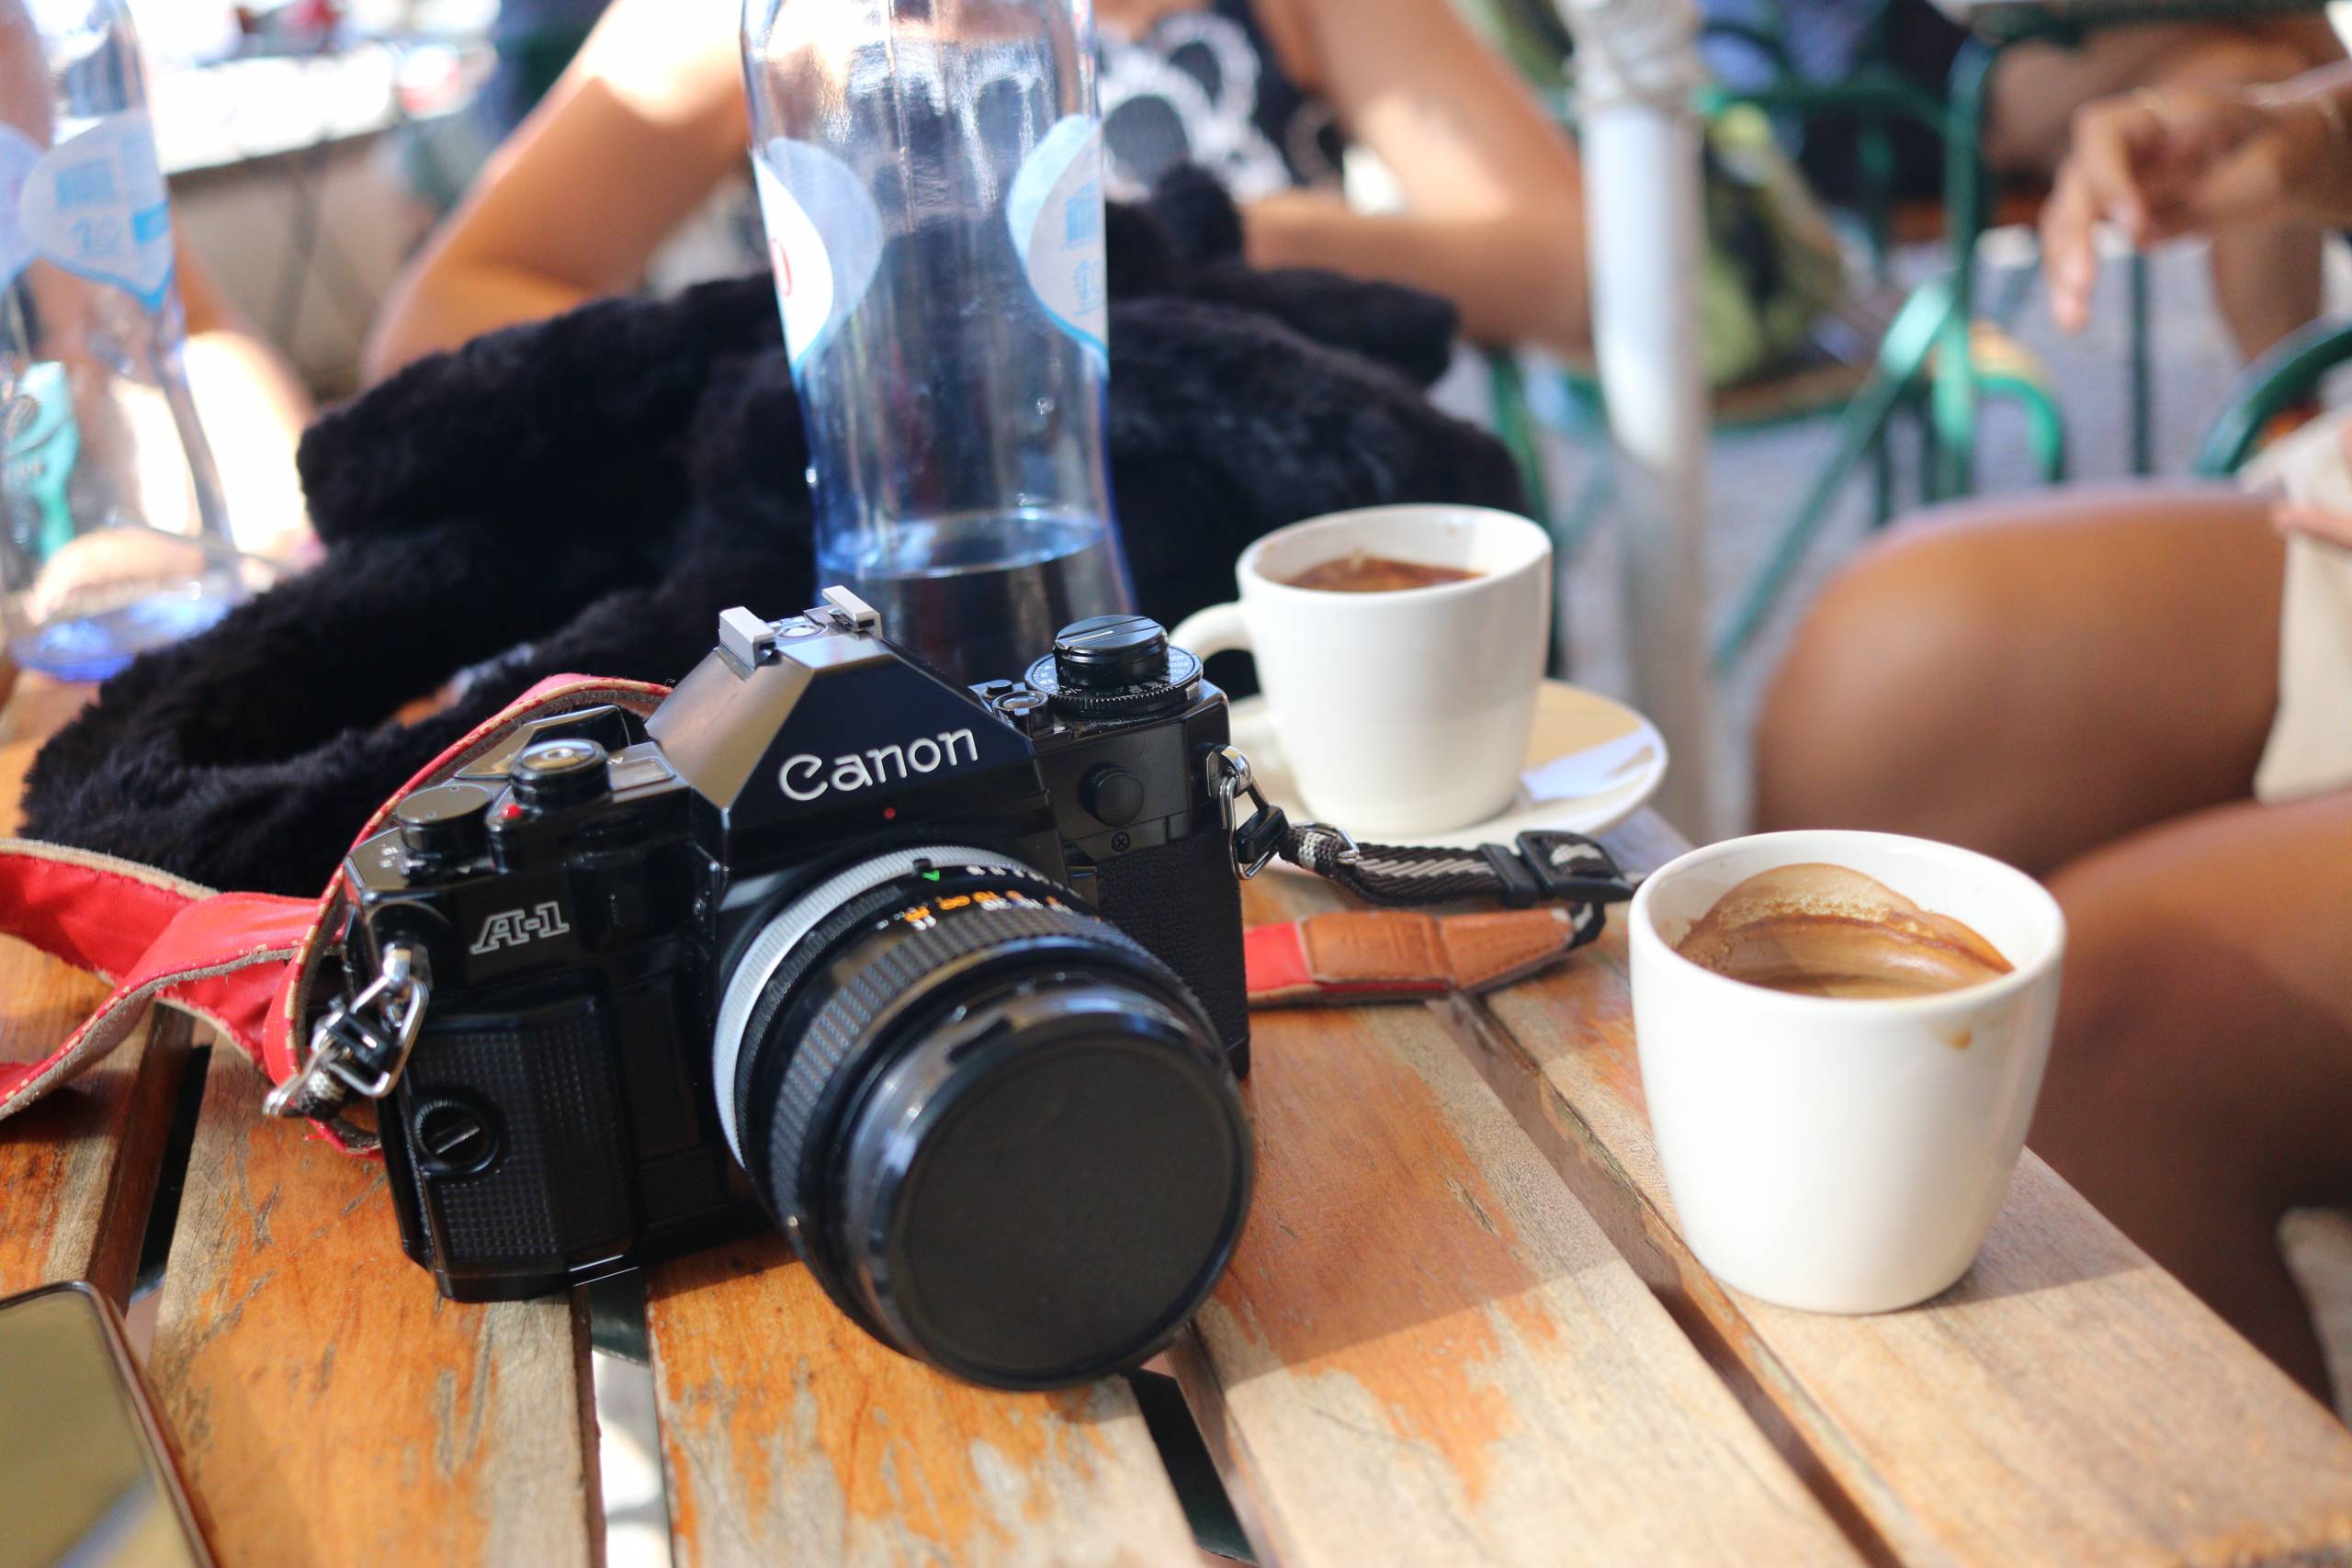 The image of the vintage photo camera and the cup of coffee can be seen as a metaphor for blogger journalism